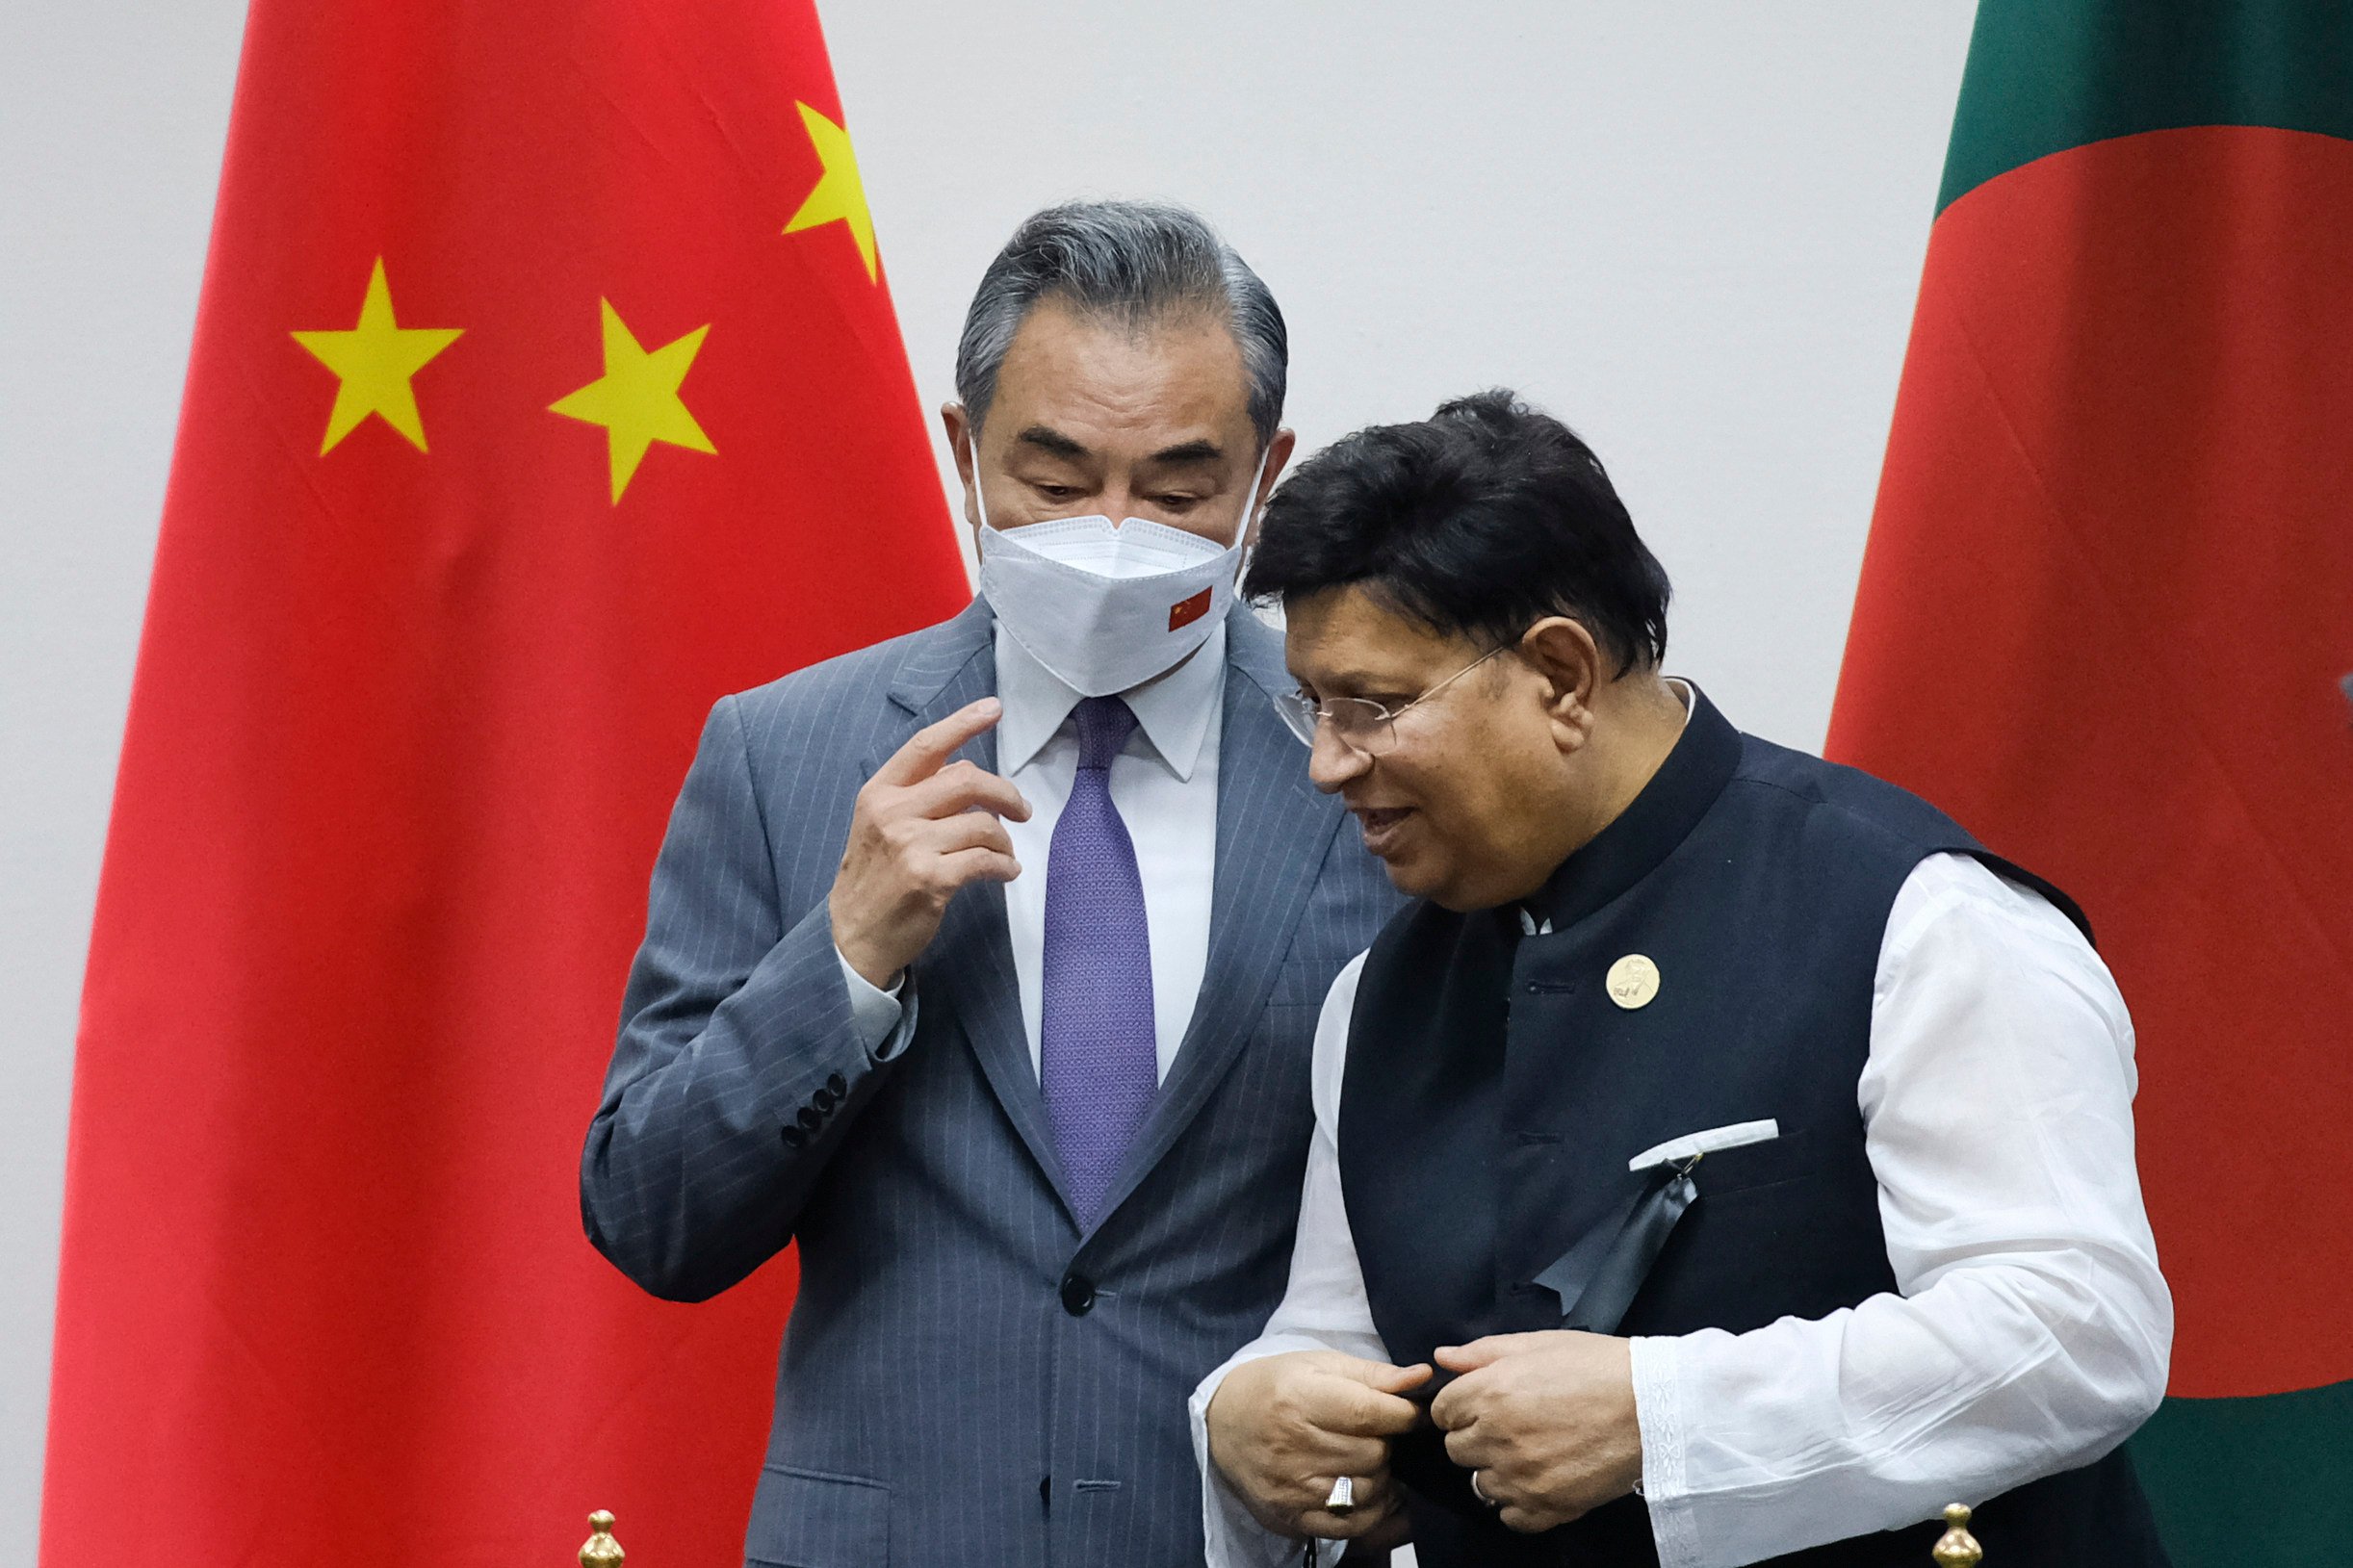 Then foreign minister Wang Yi (left) speaks to his Bangladeshi counterpart A.K. Abdul Momen during a meeting in Dhaka, Bangladesh, on August 7, 2022. China’s experience as a developing country has much from which Bangladesh could learn. Photo: AP